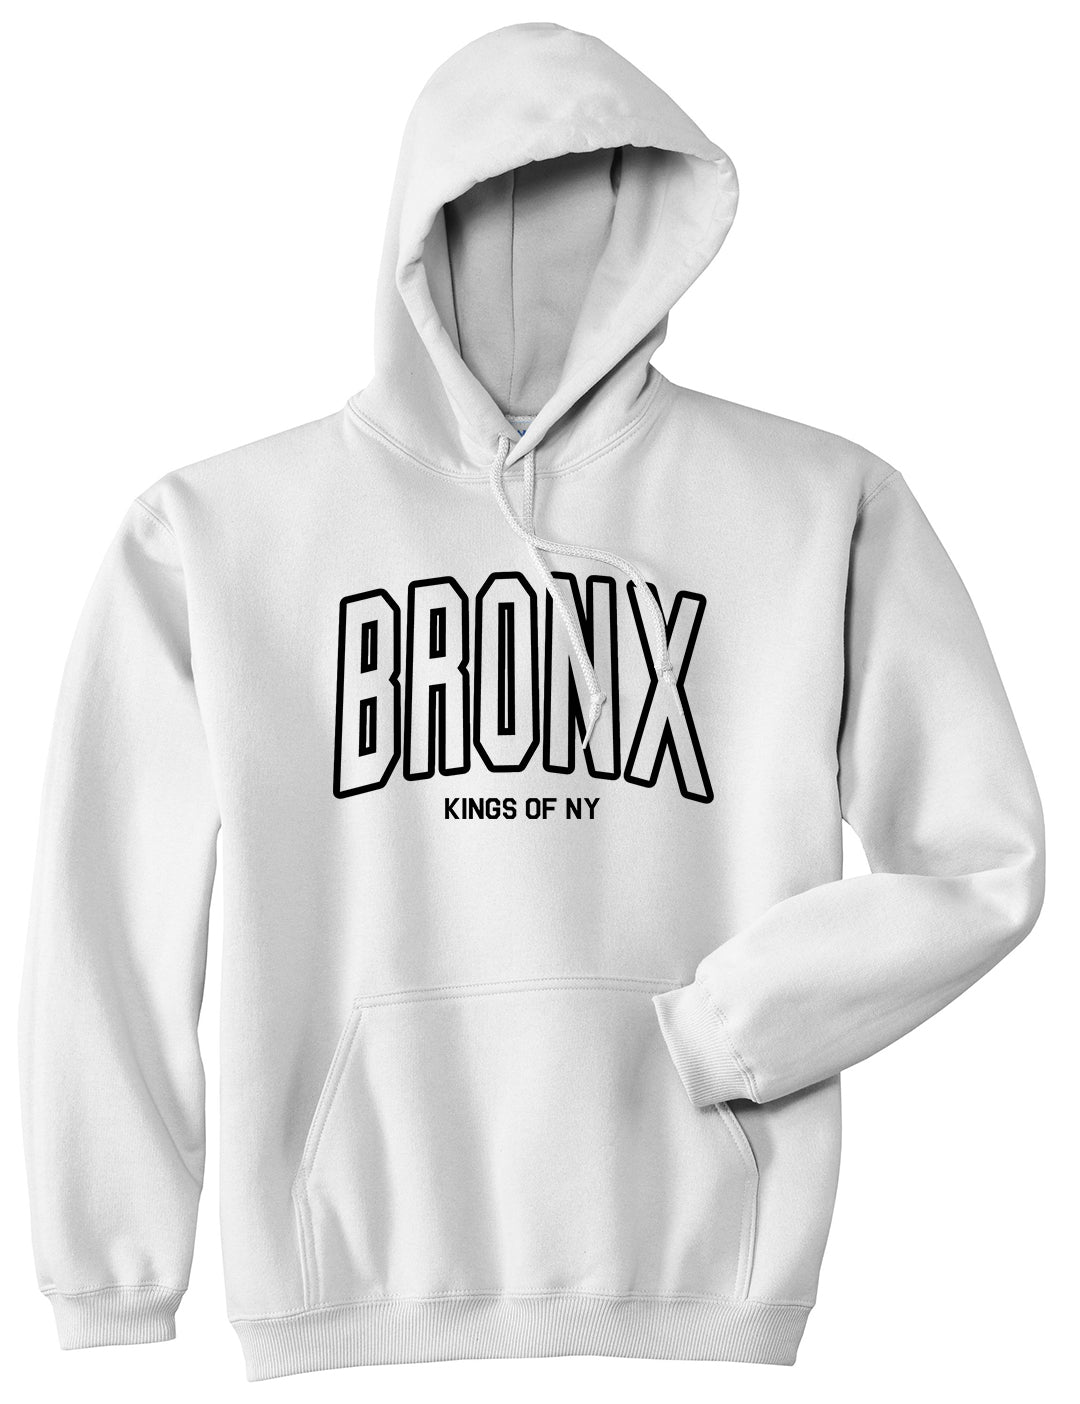 BRONX College Outline Mens Pullover Hoodie White by Kings Of NY